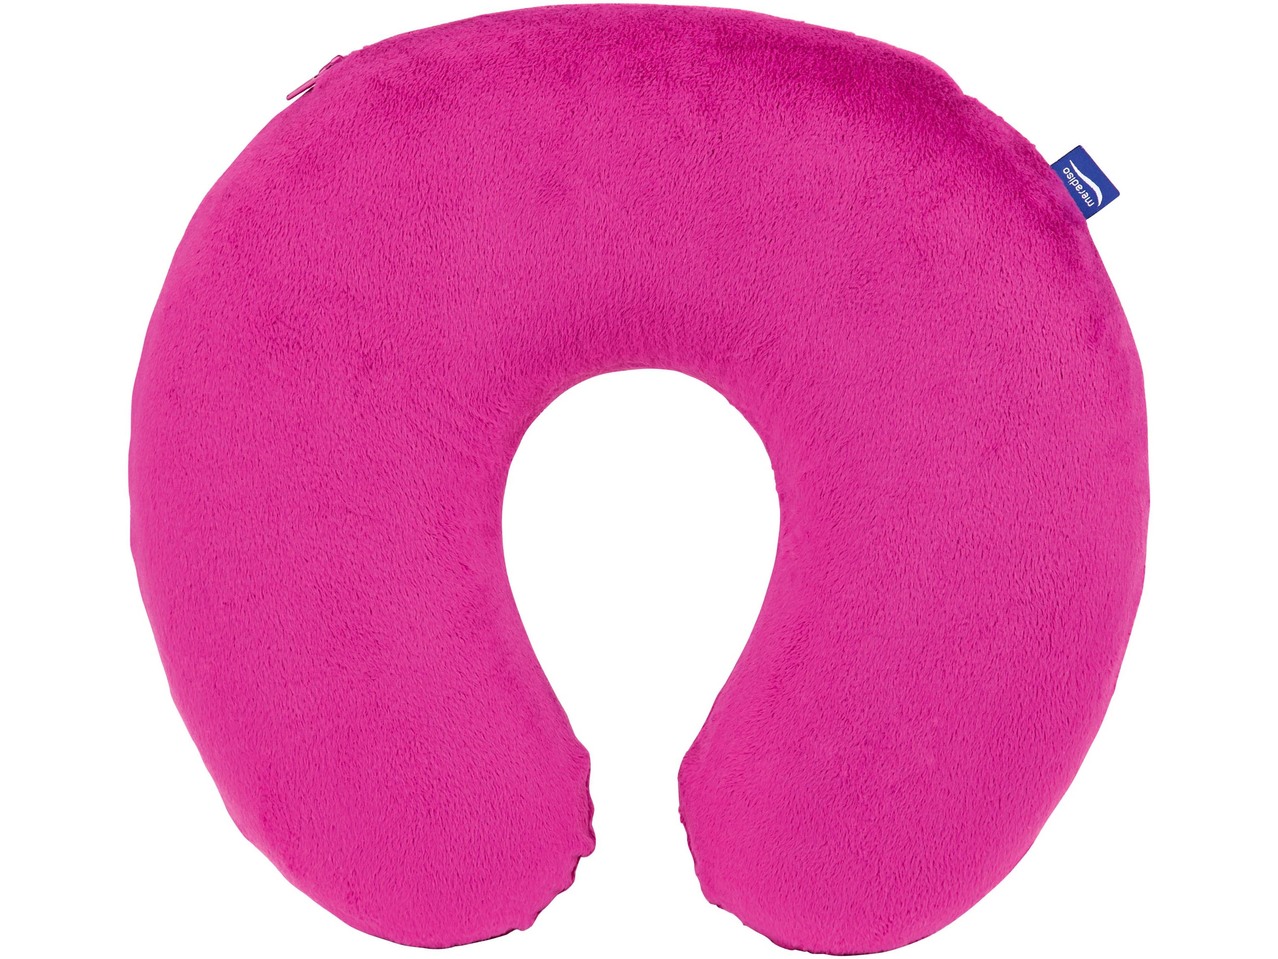 Half Roll or Neck Support Cushion